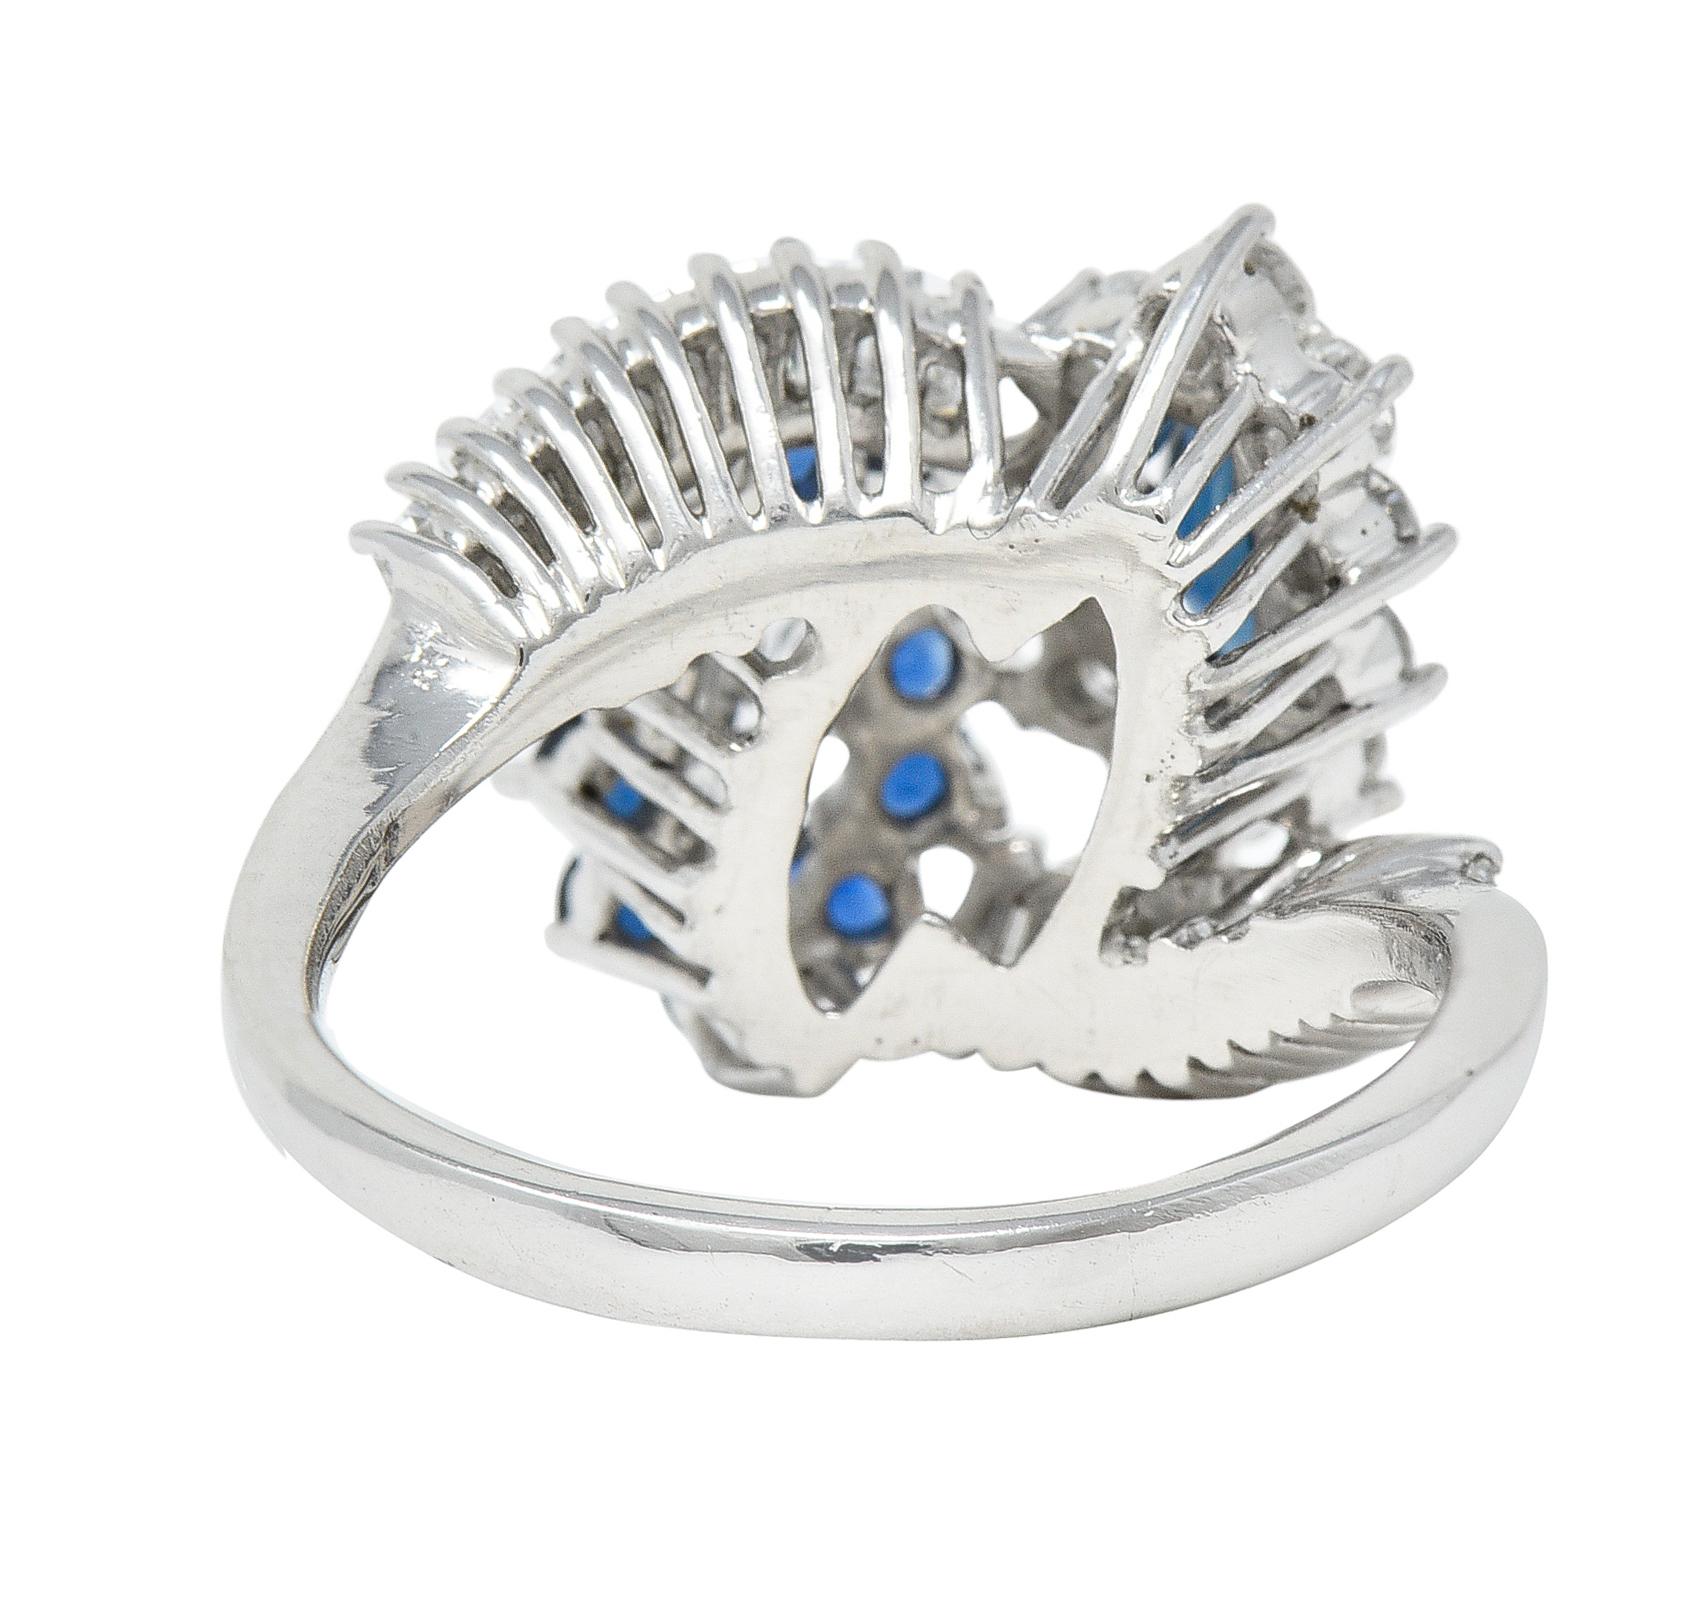 Women's or Men's Mid-Century 1.68 Carats Marquise Cut Sapphire Diamond Platinum Clustered Ring